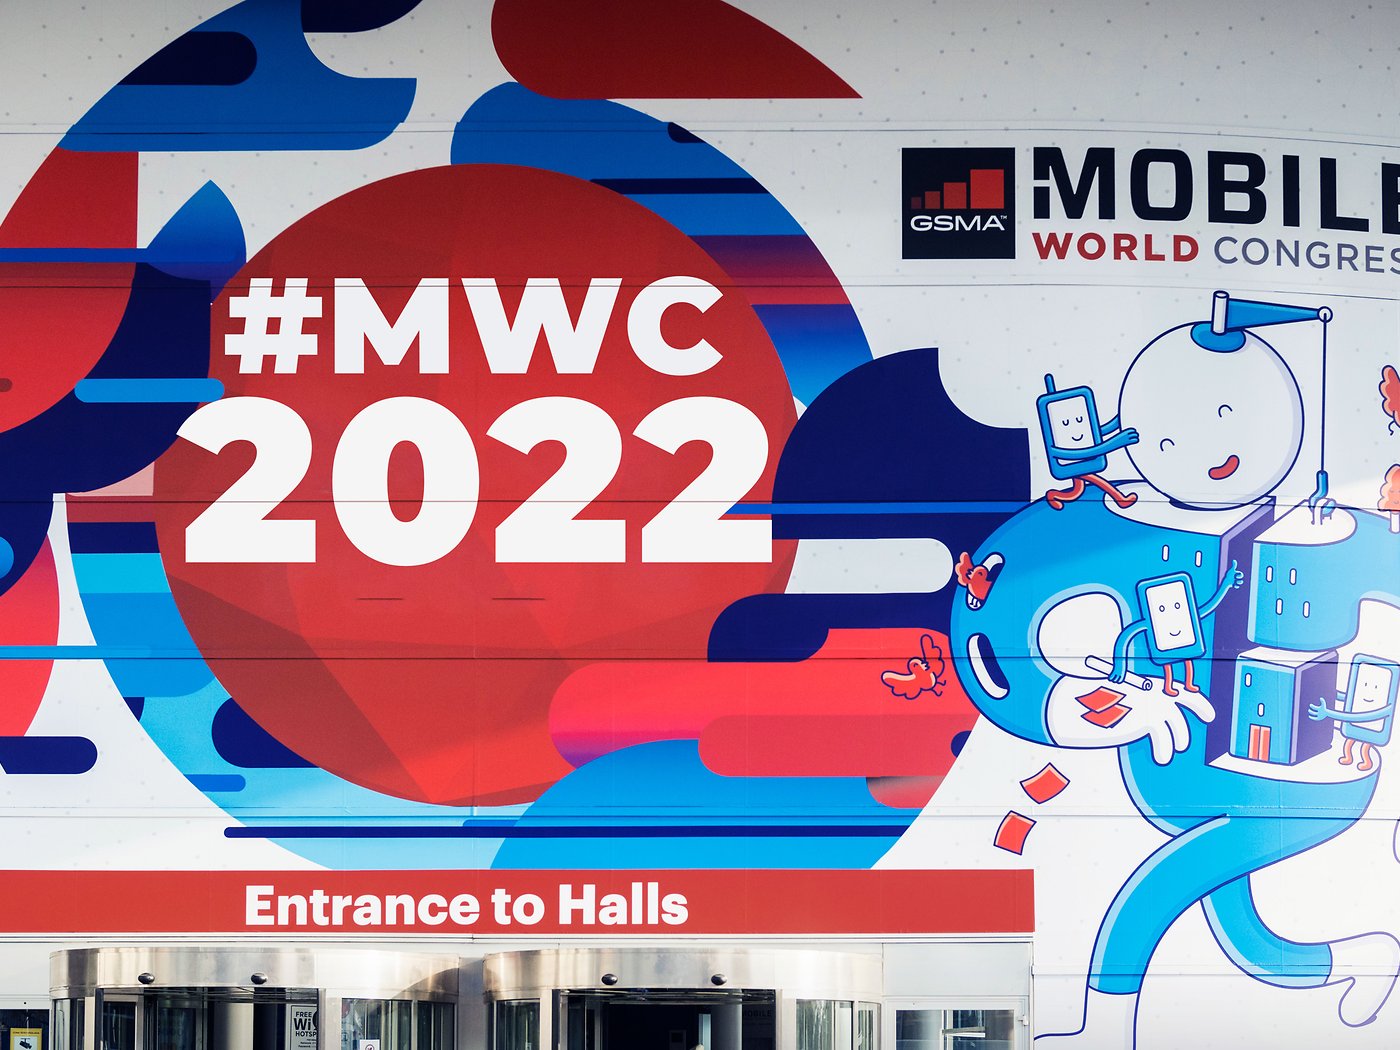 Mwc 2022 Schedule Mwc 2022 | Here Are The Highlights Of The Barcelona Show | Nextpit